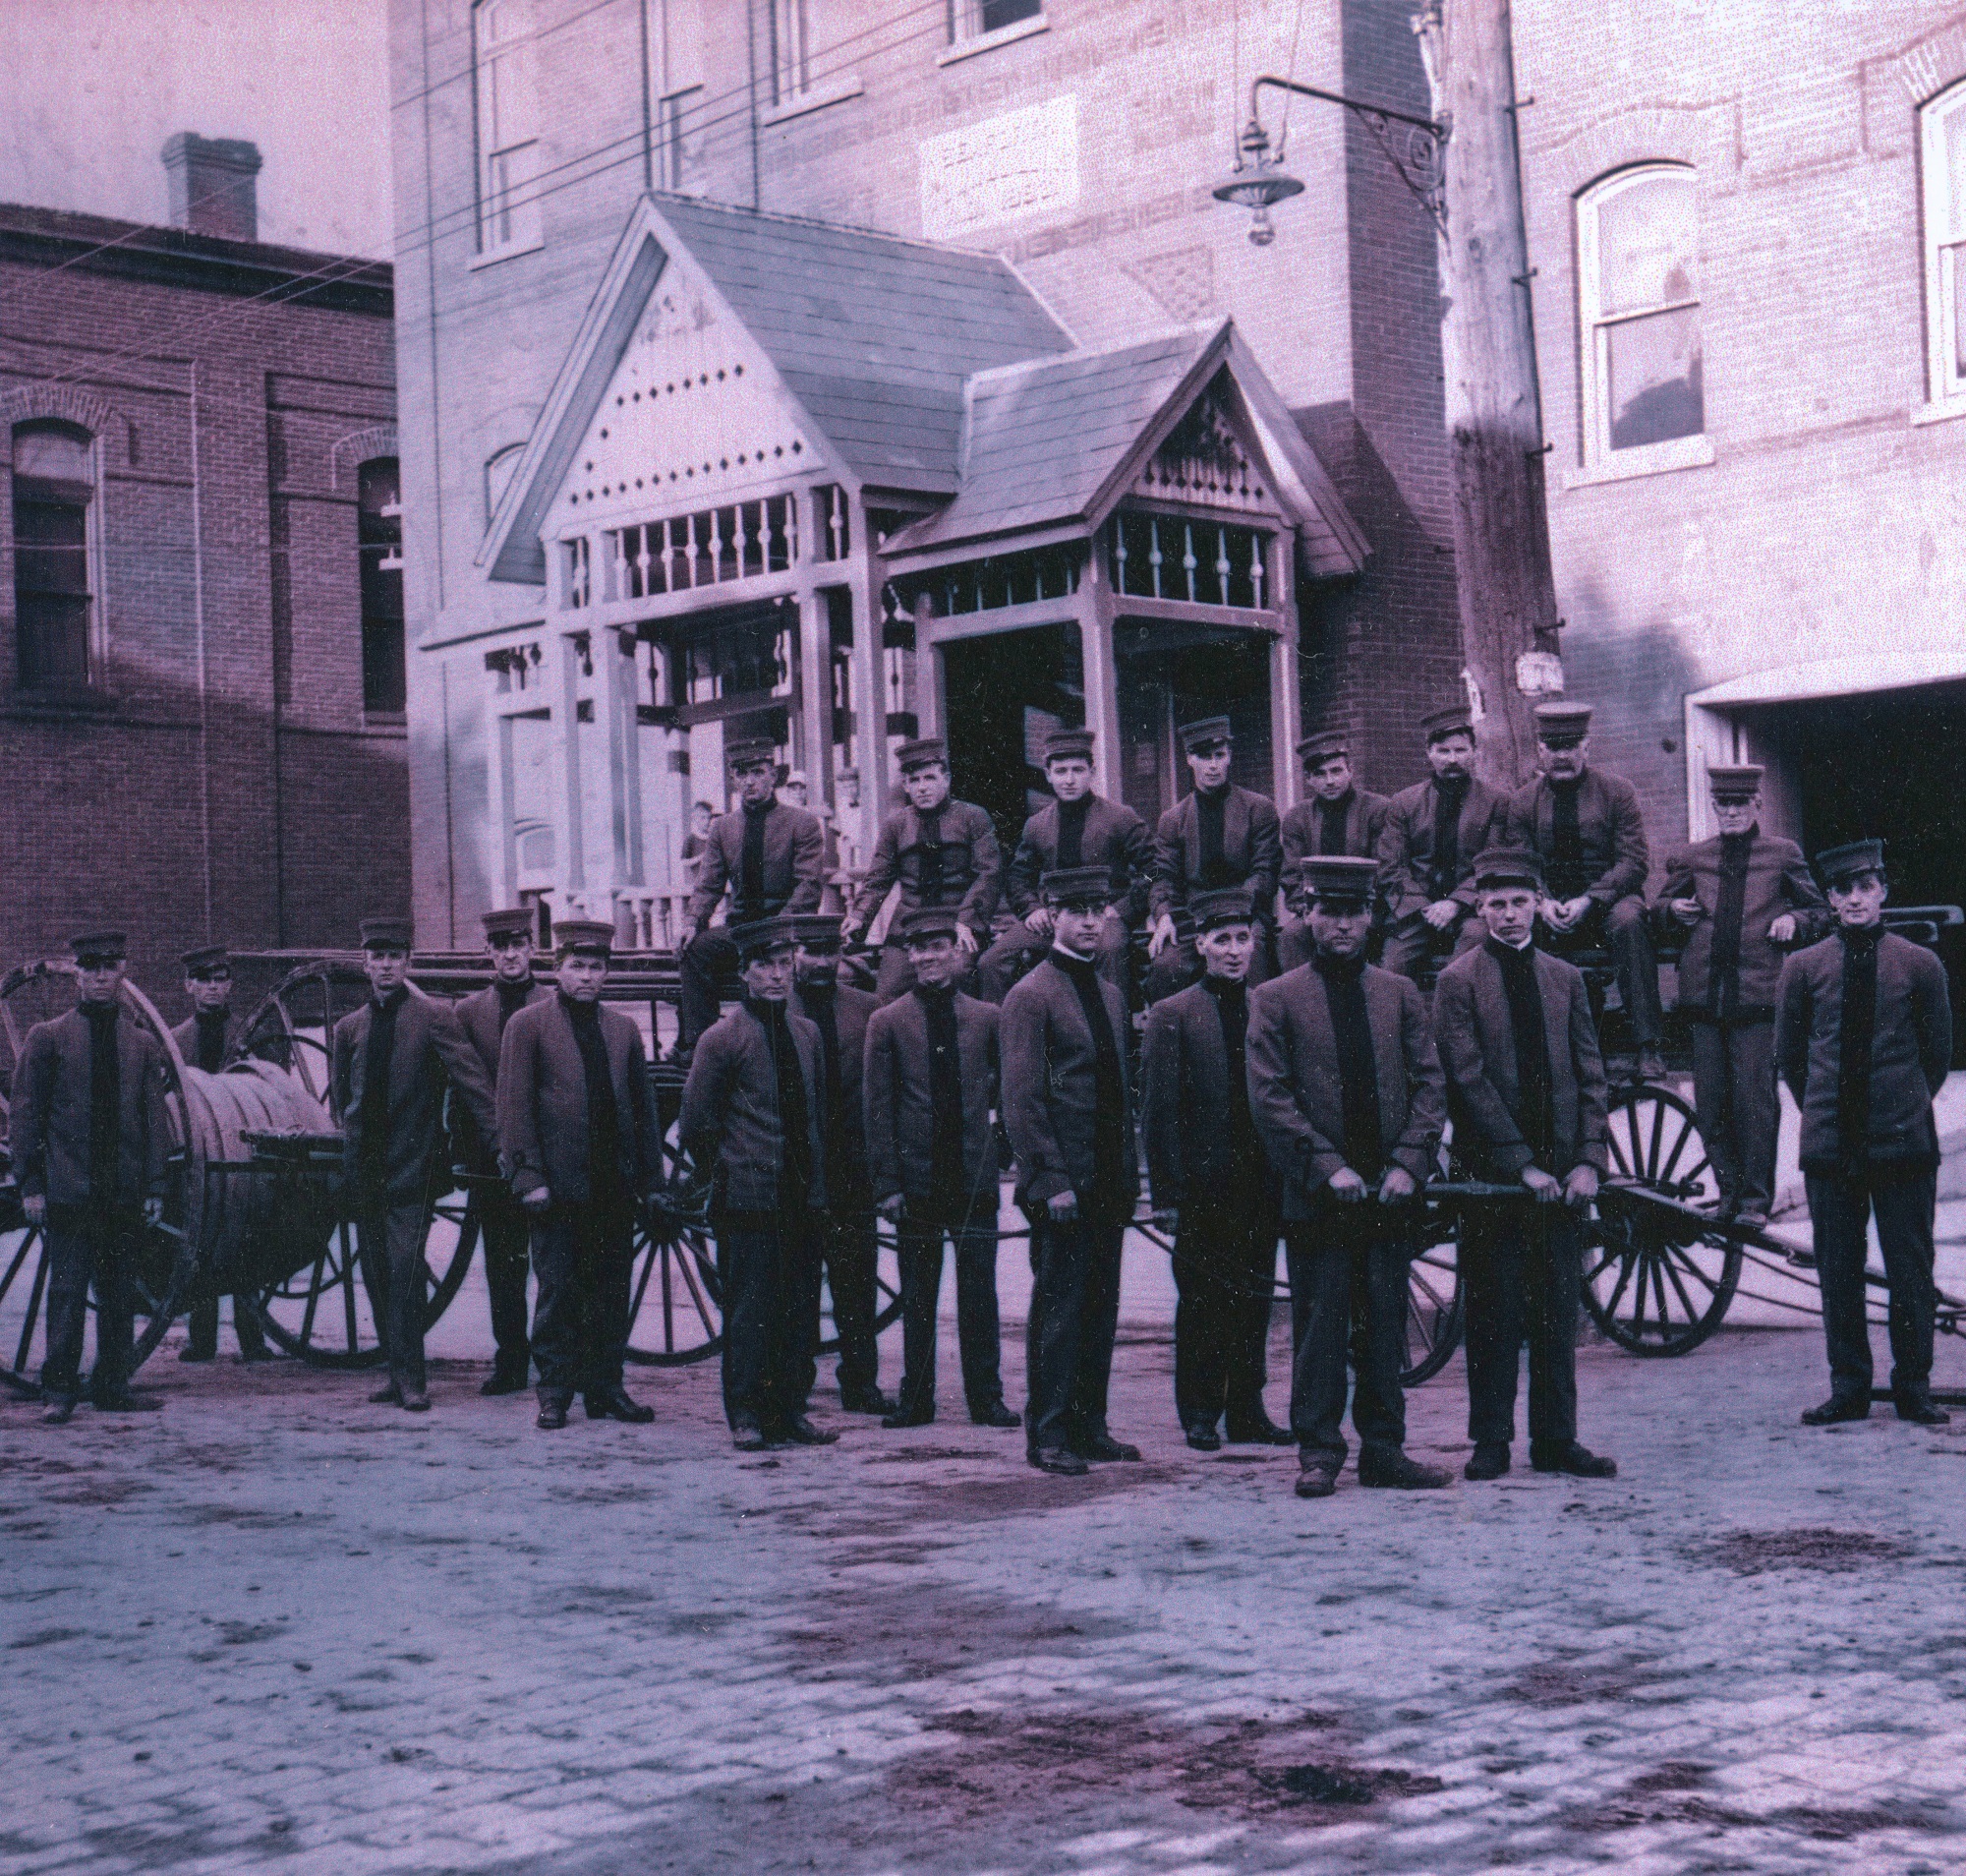 A historical photo taken in front of Town Hall.